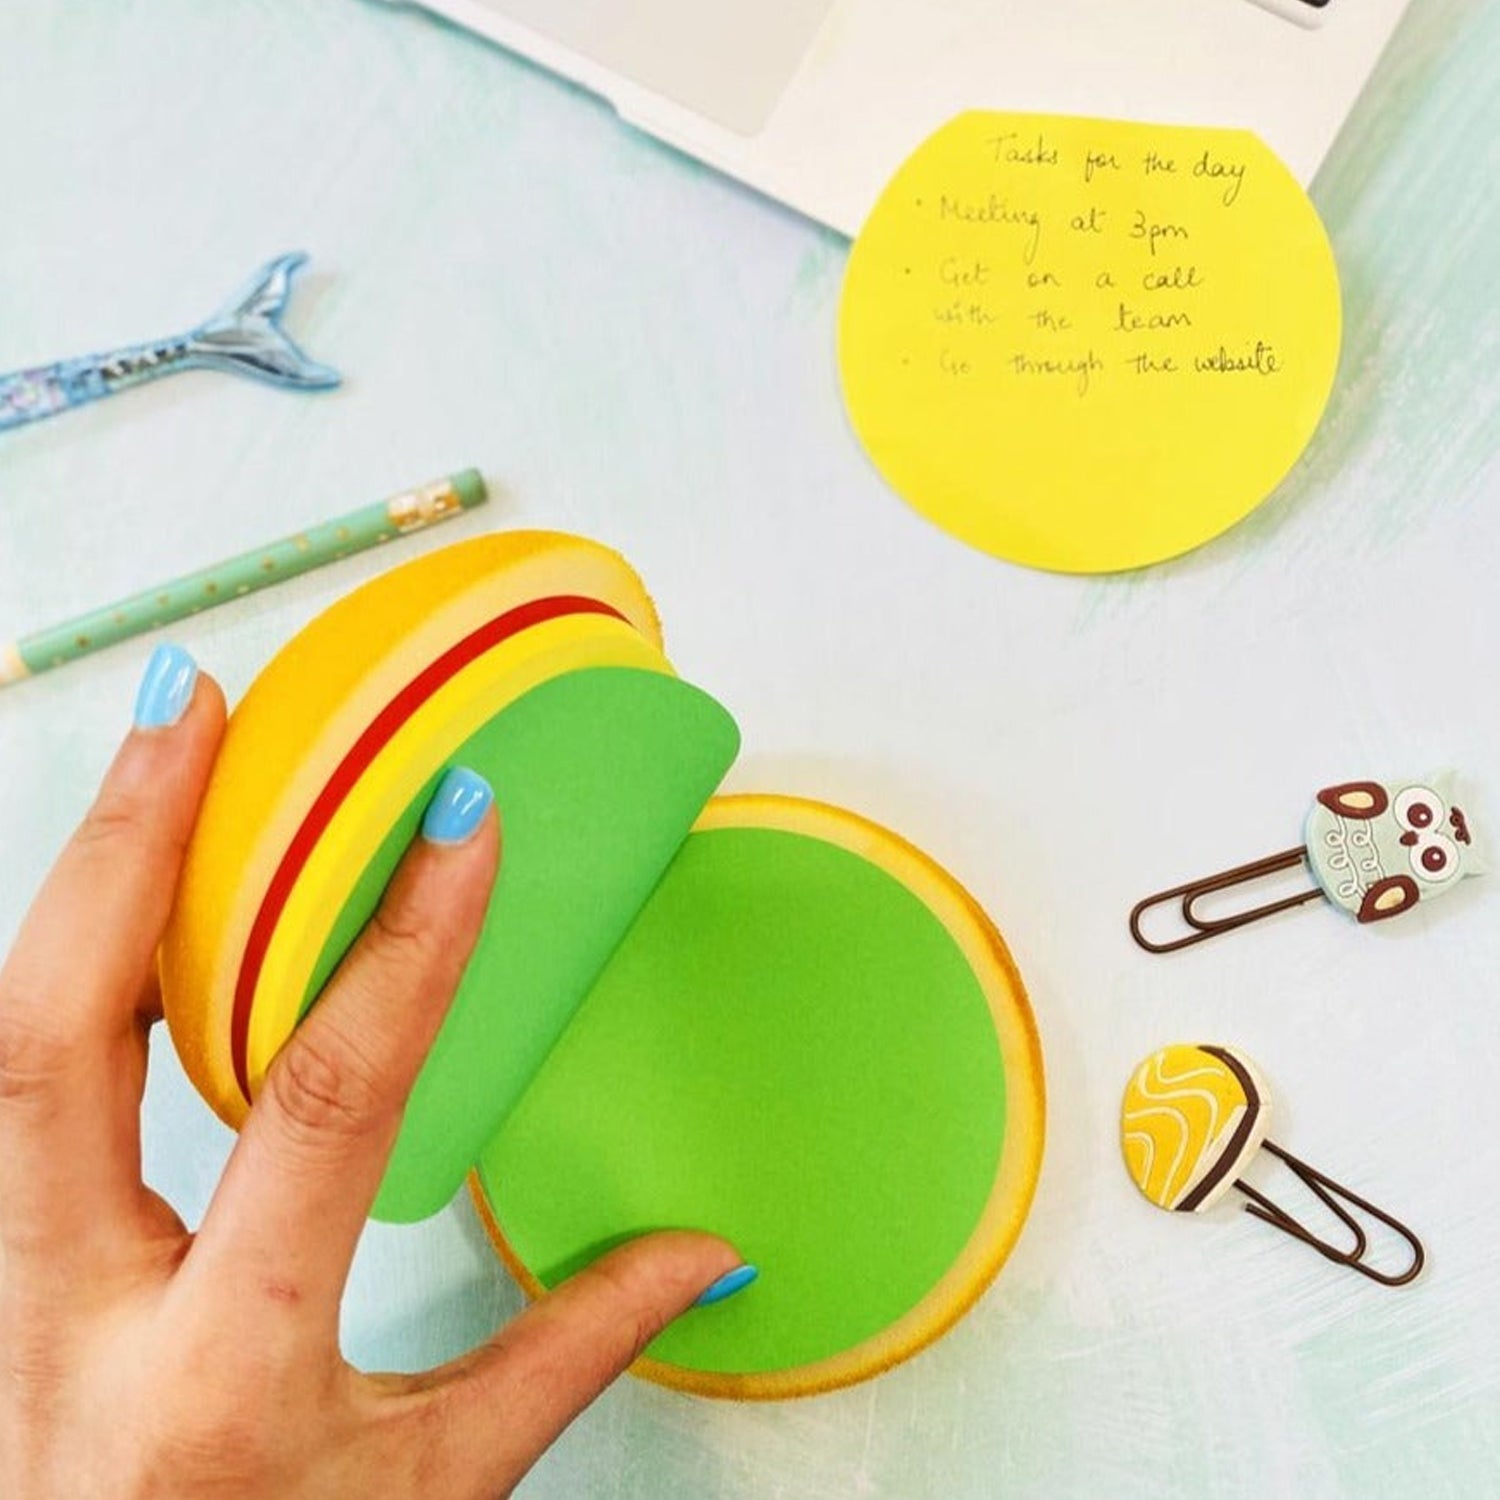 8073 Burger Shaped Notepad / Sticky Notes / Memo Pads, Unique Mini Notes (Multicolor)